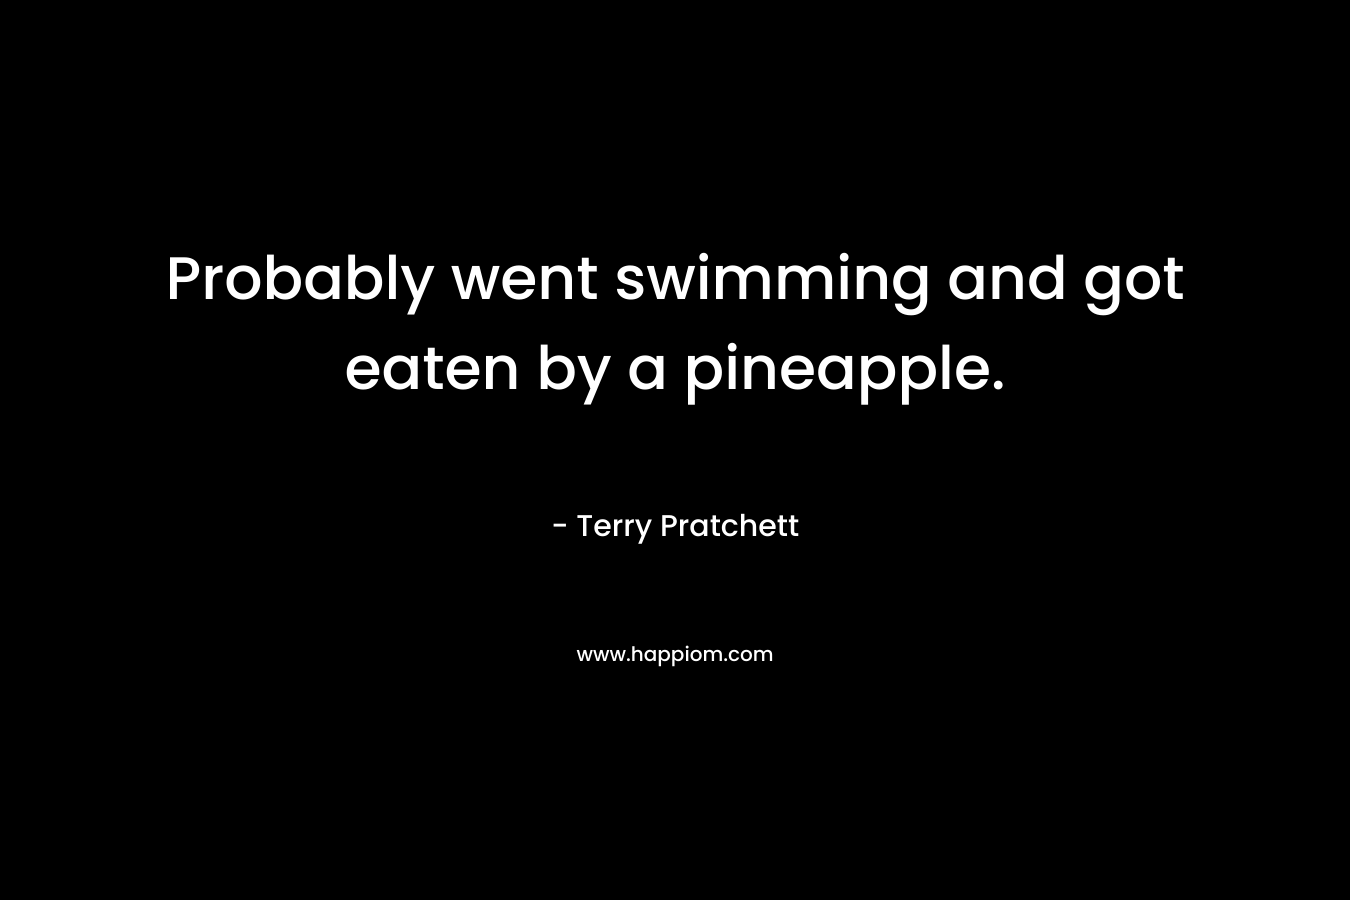 Probably went swimming and got eaten by a pineapple. – Terry Pratchett